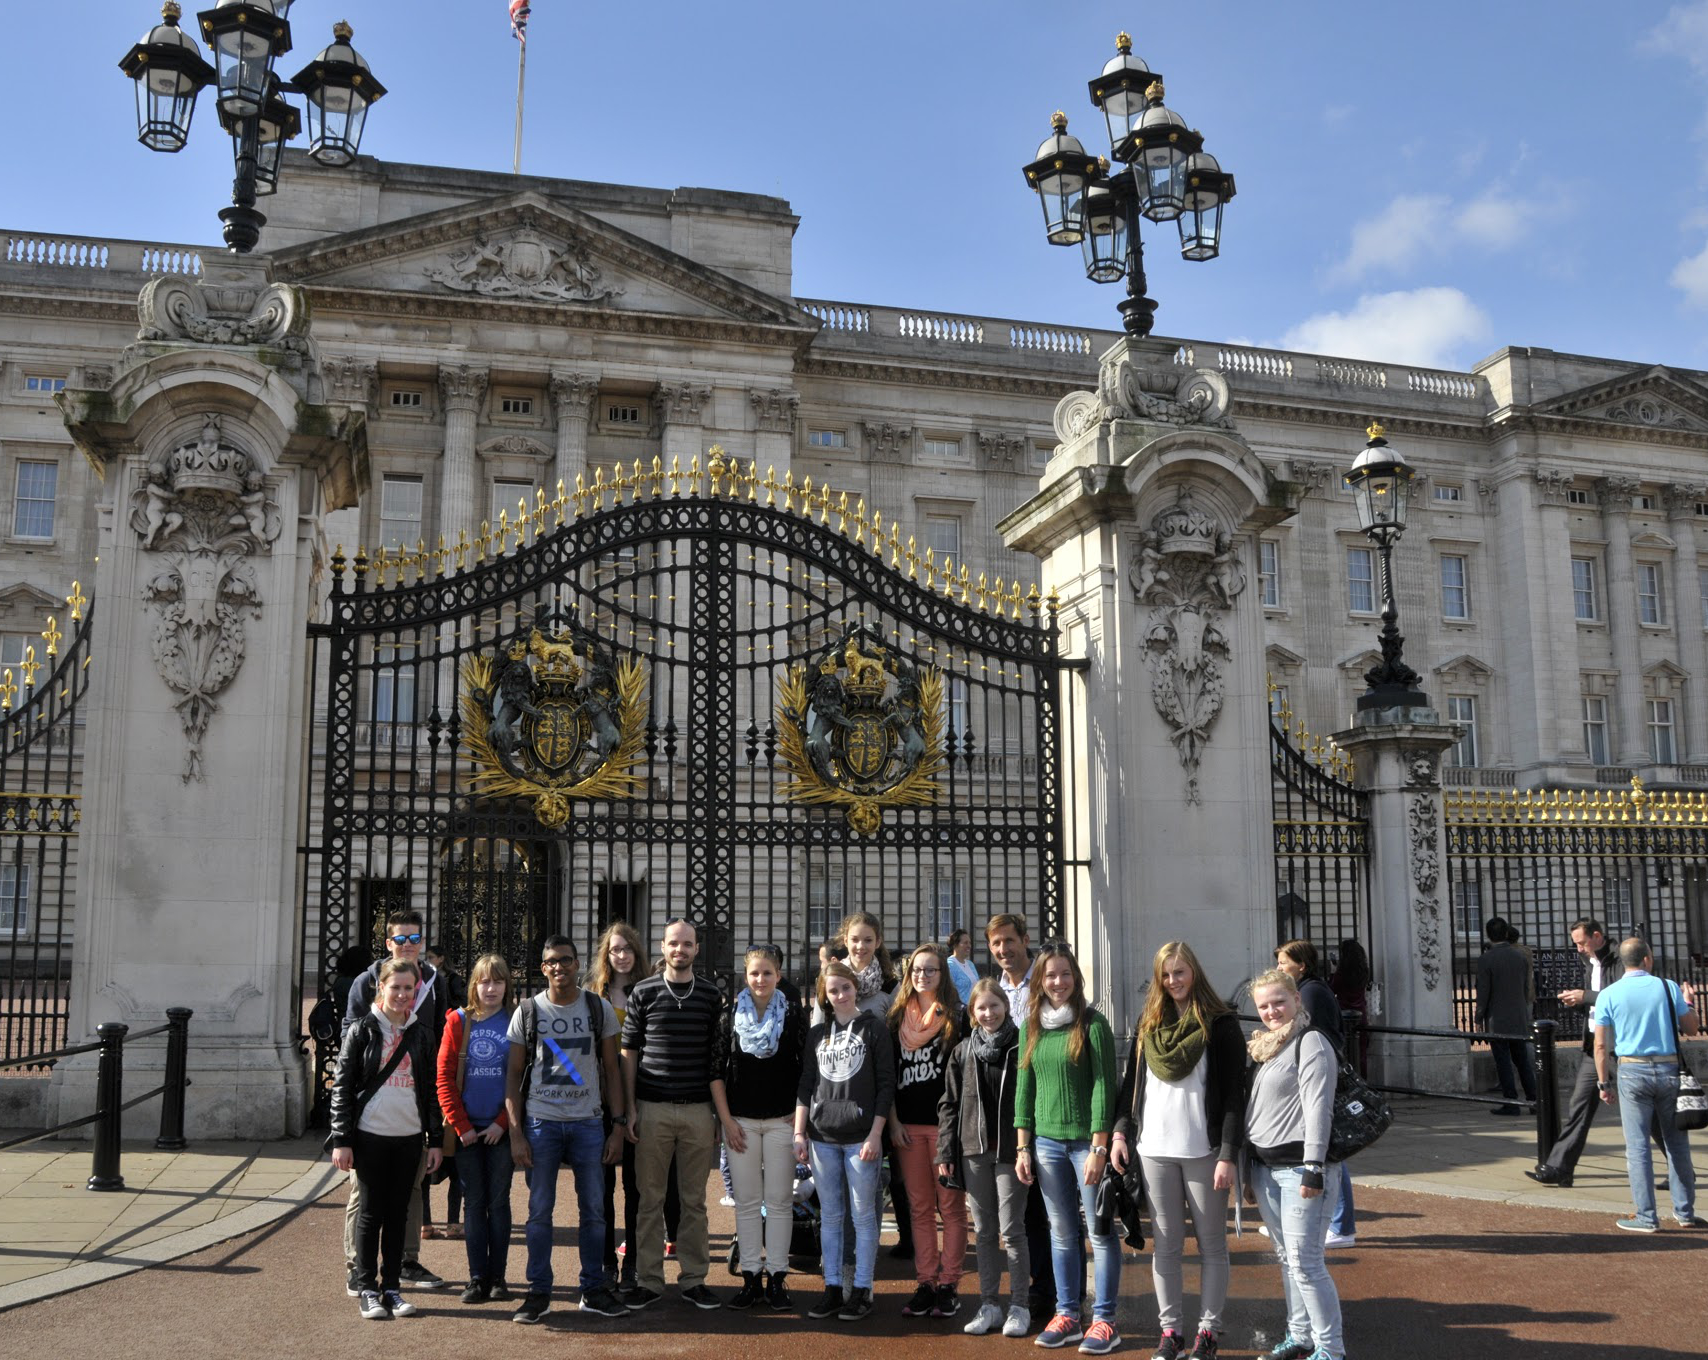 Students lined in front of Buckingham Palace